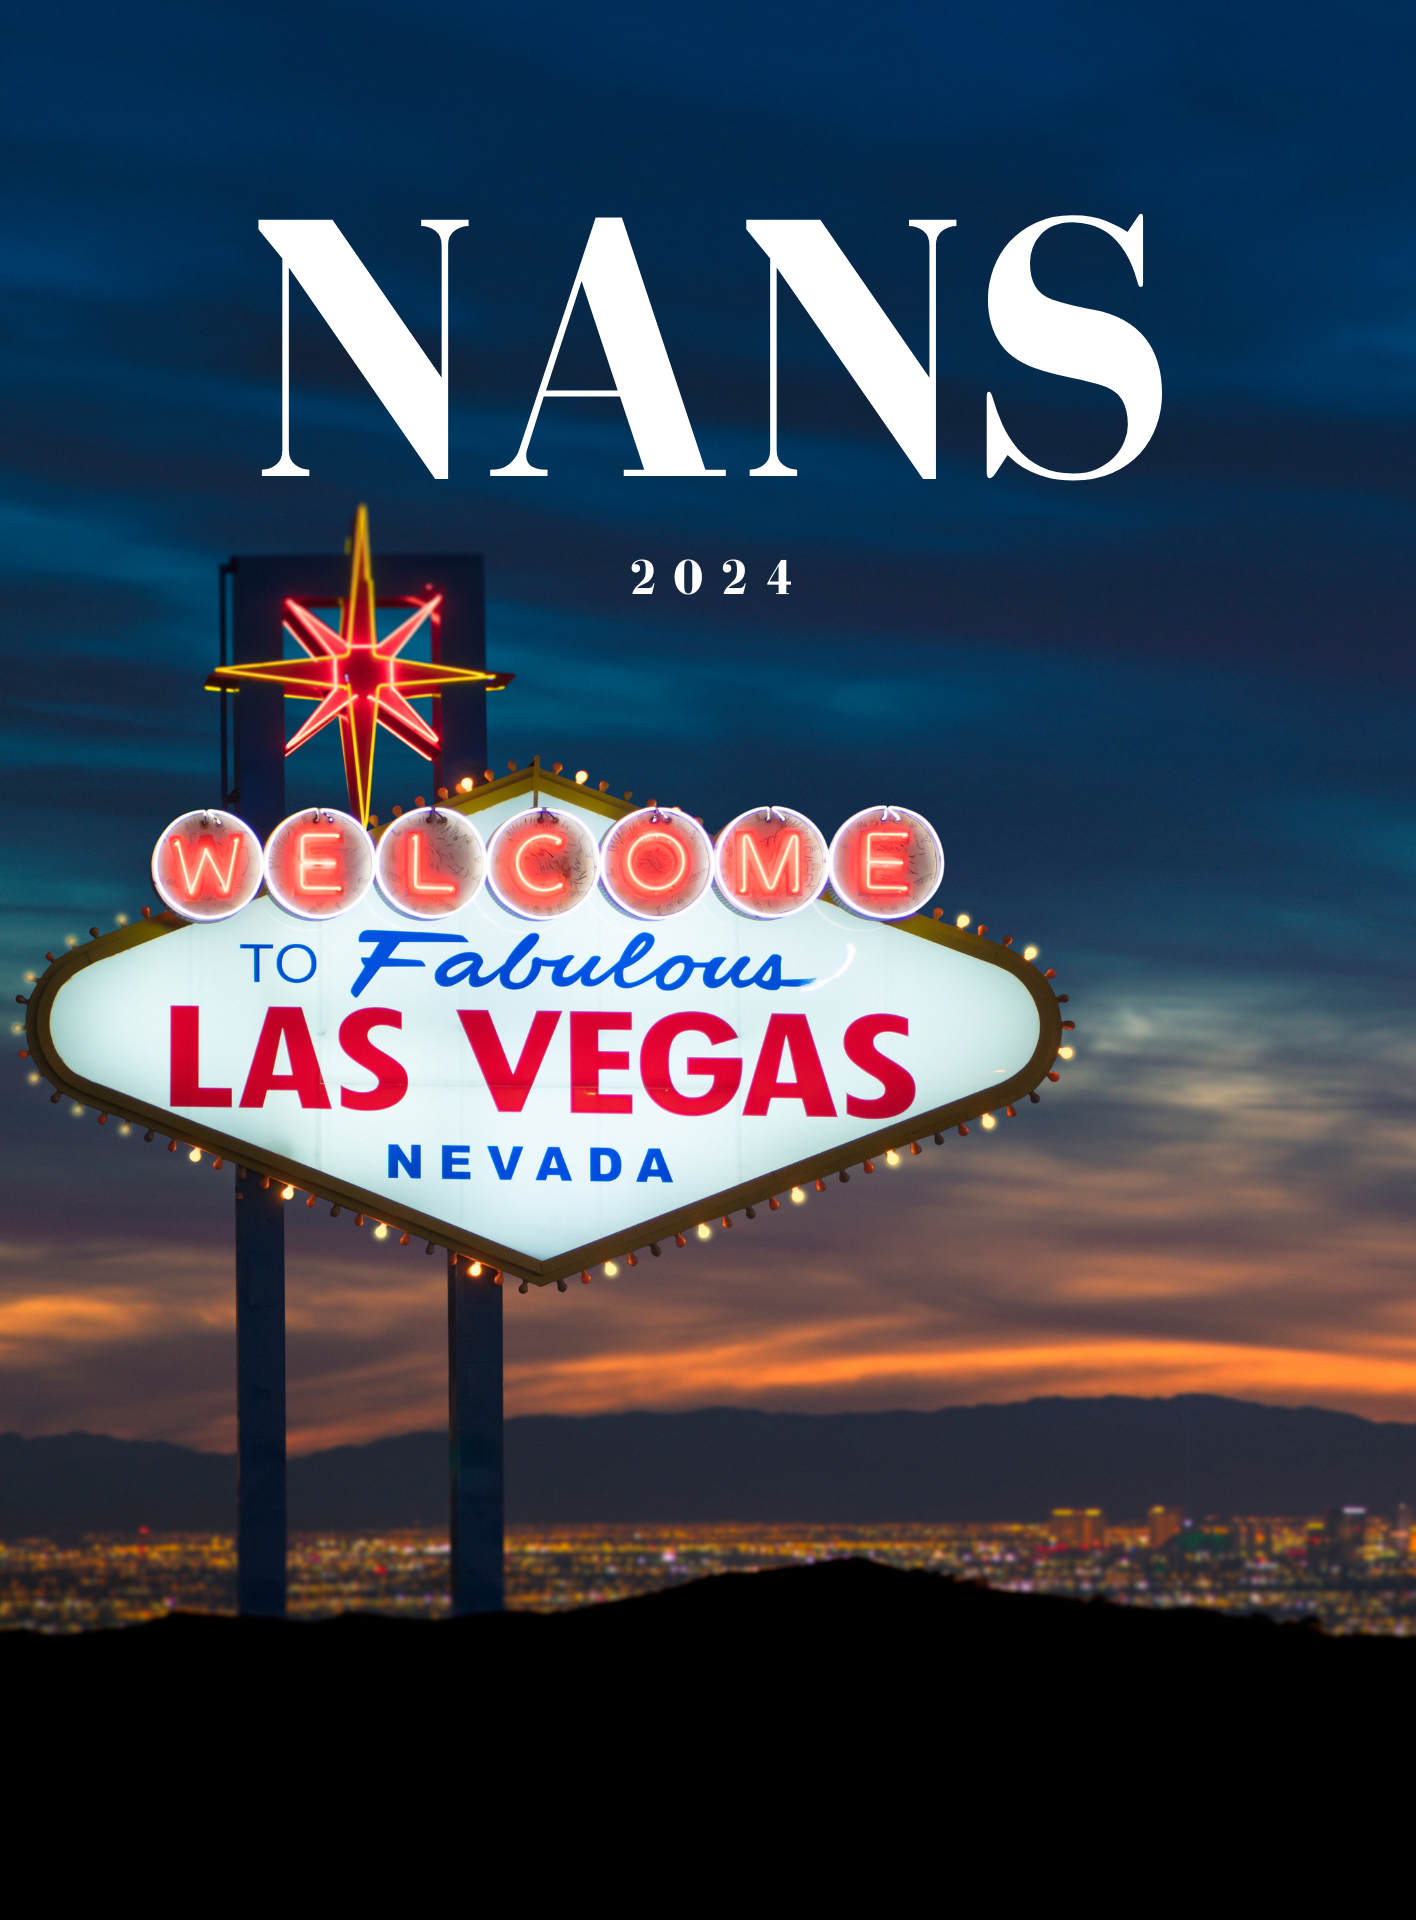 North American Neuromodulation Society Annual Meeting in Las Vegas